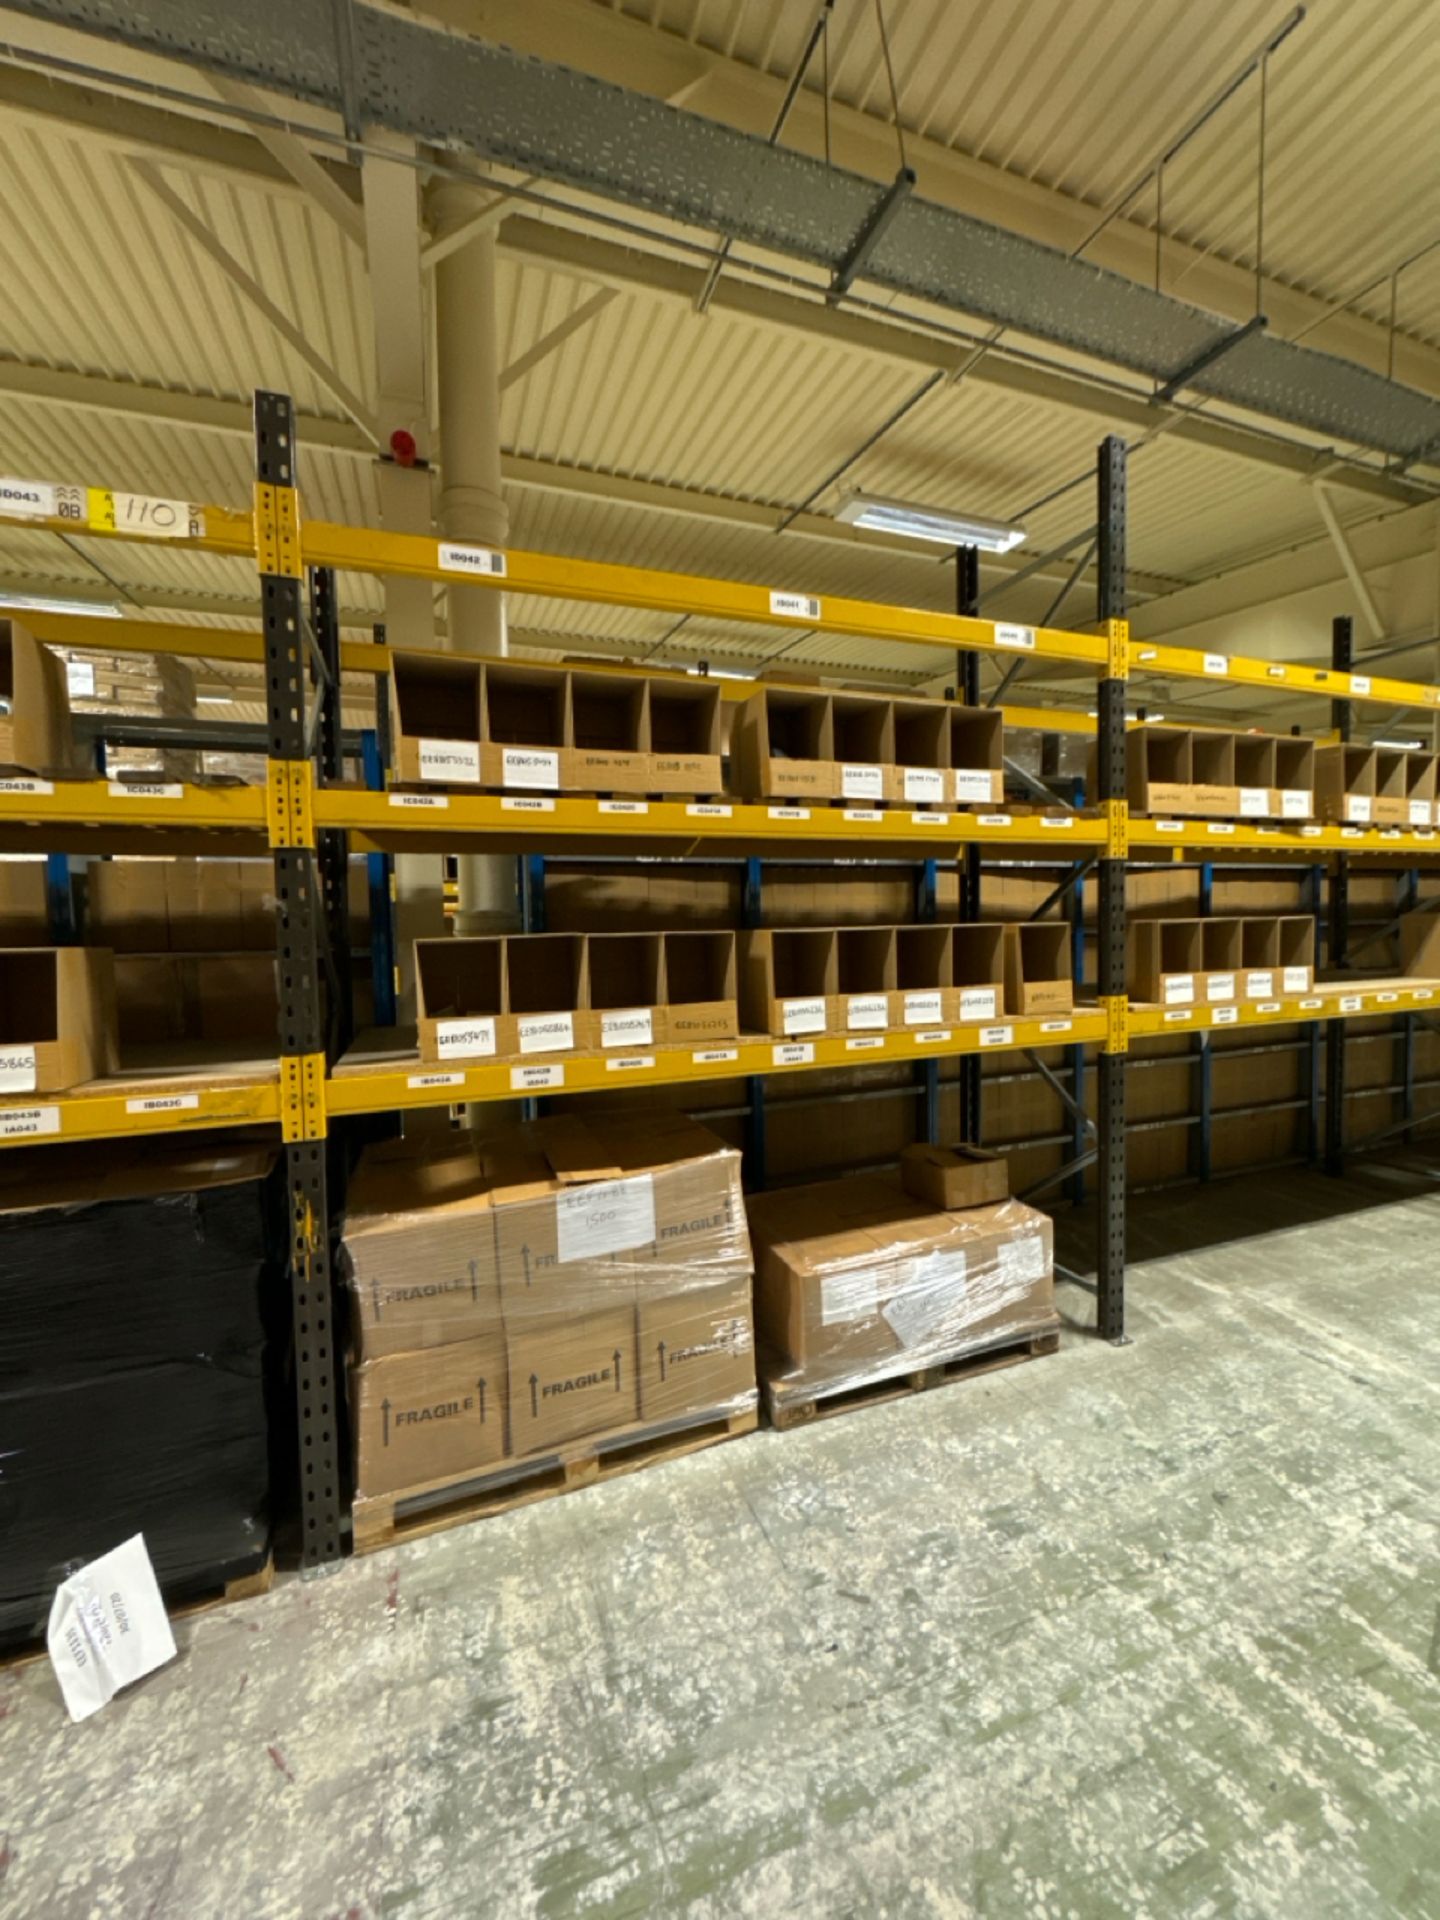 15 Bays Of Boltless Industrial Pallet Racking - Image 8 of 8